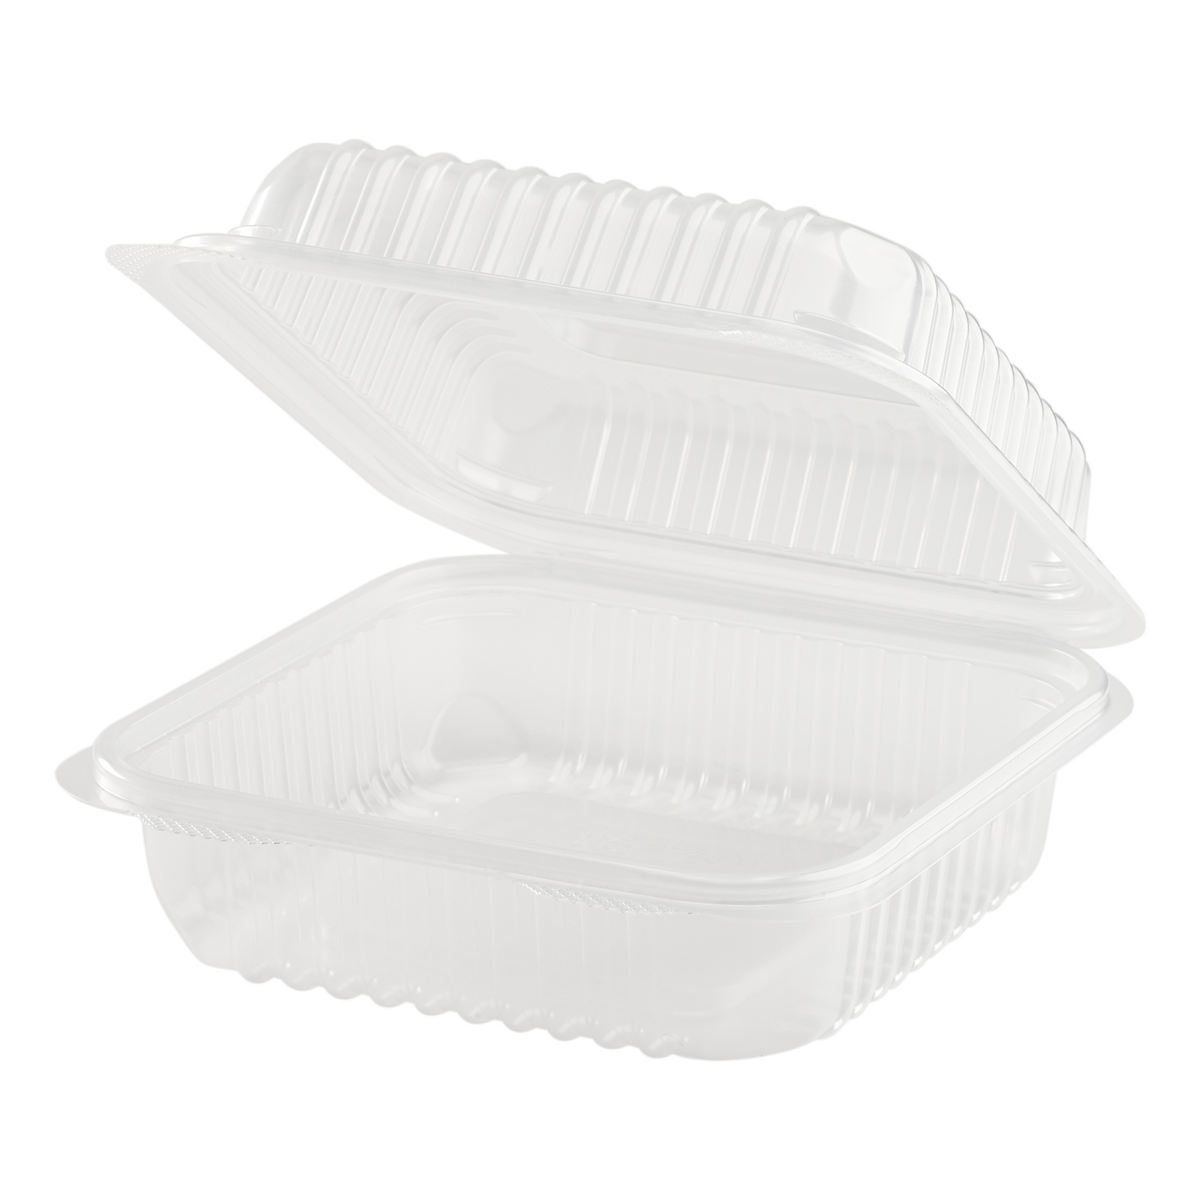 7 Carryout Foil Container with Plastic Lid #270P